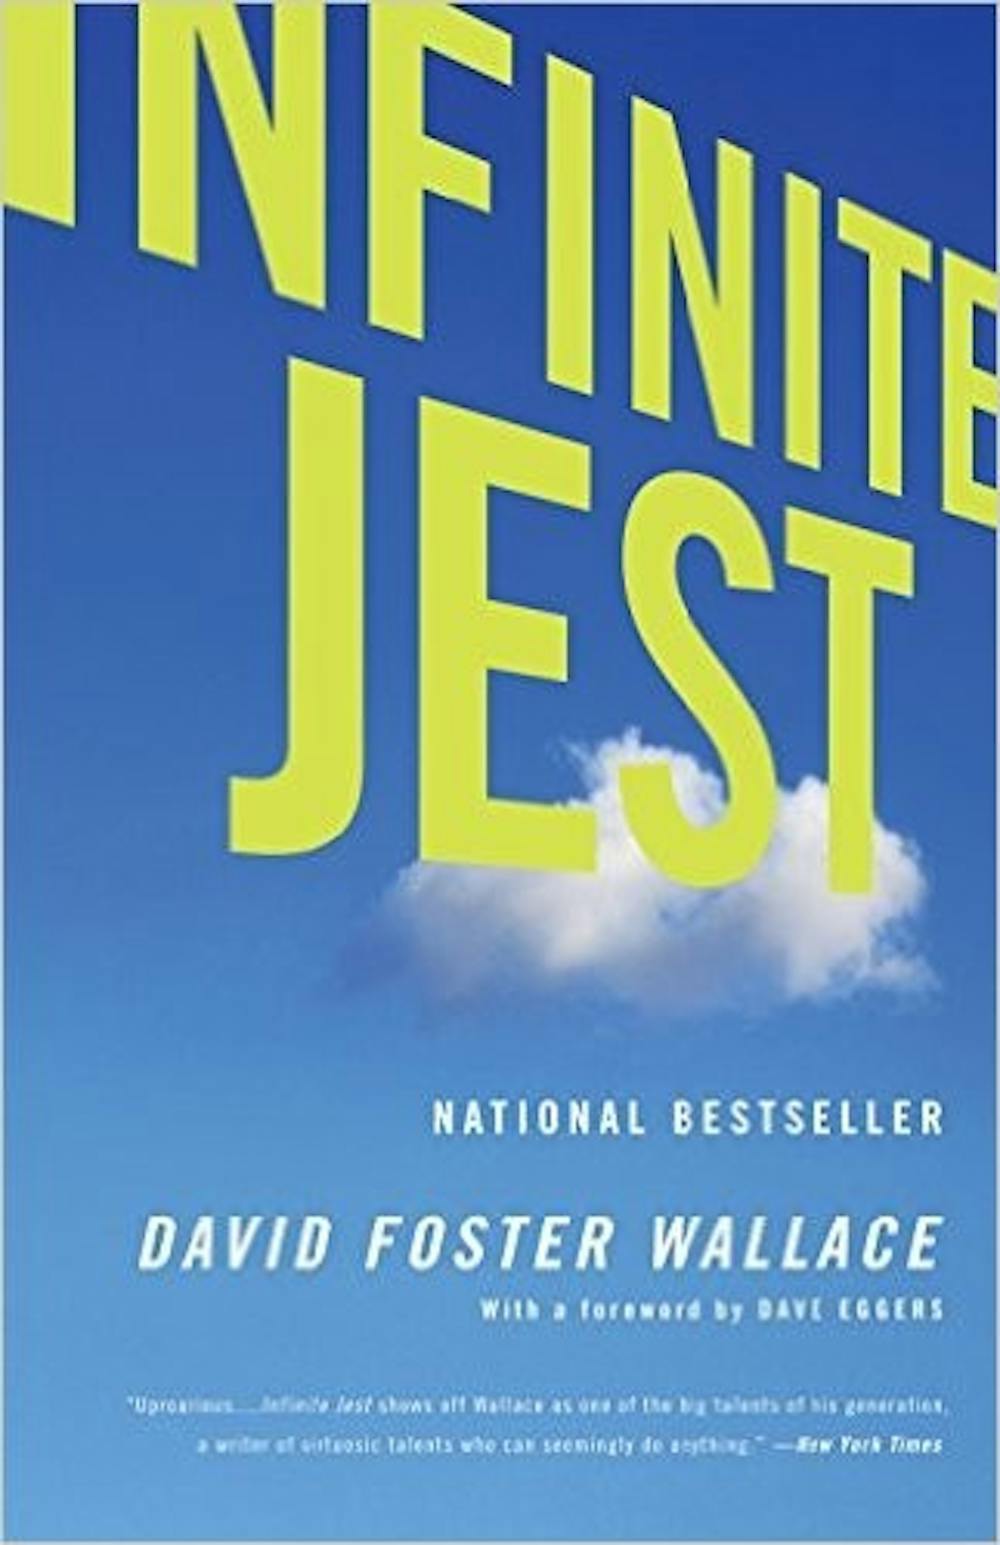 <p>"The Pale King" was a sequel to this novel, "Infinite Jest."</p>